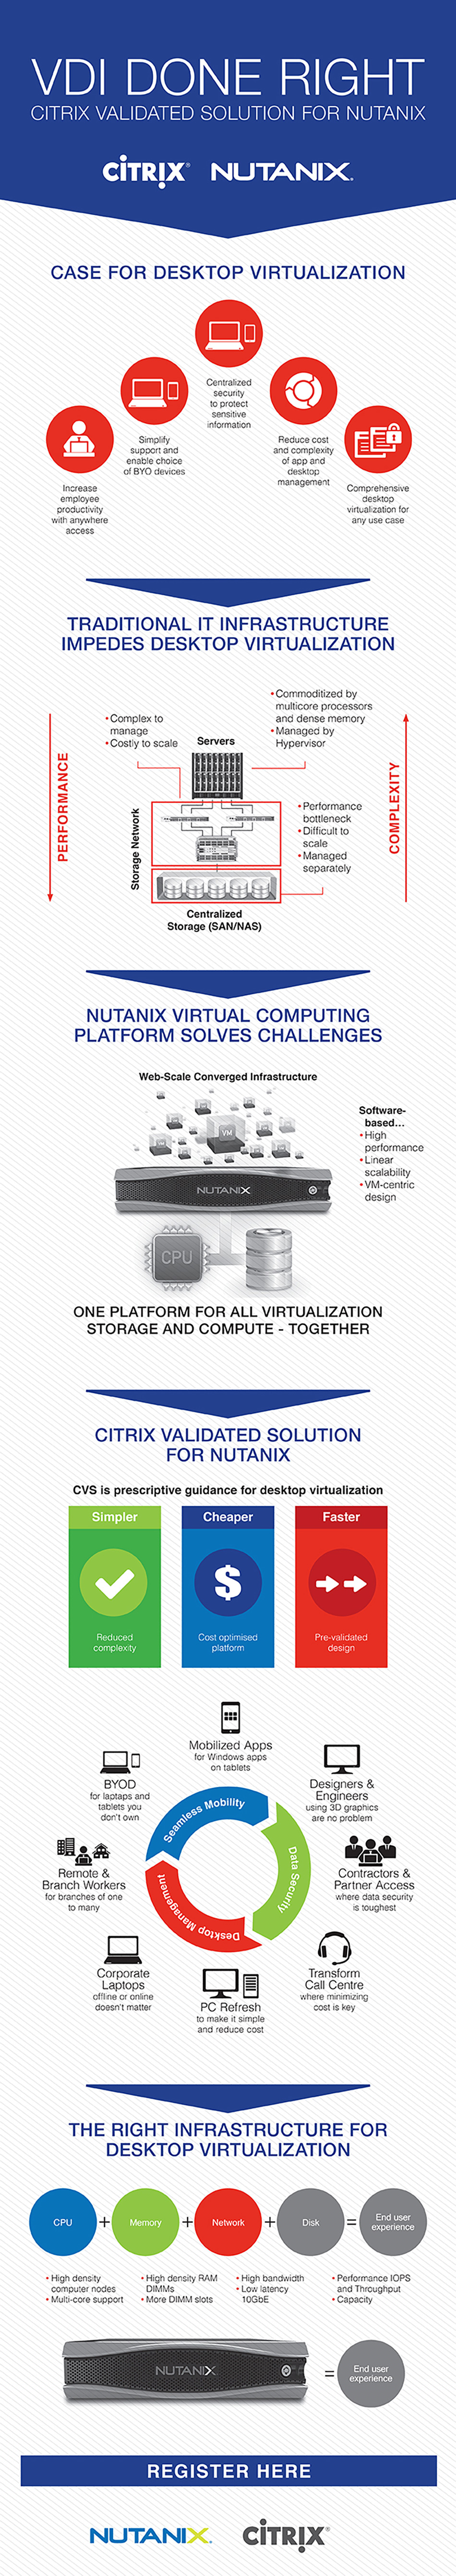 Nutanix presents the business case for a validated desktop virtualization solution with Citrix.